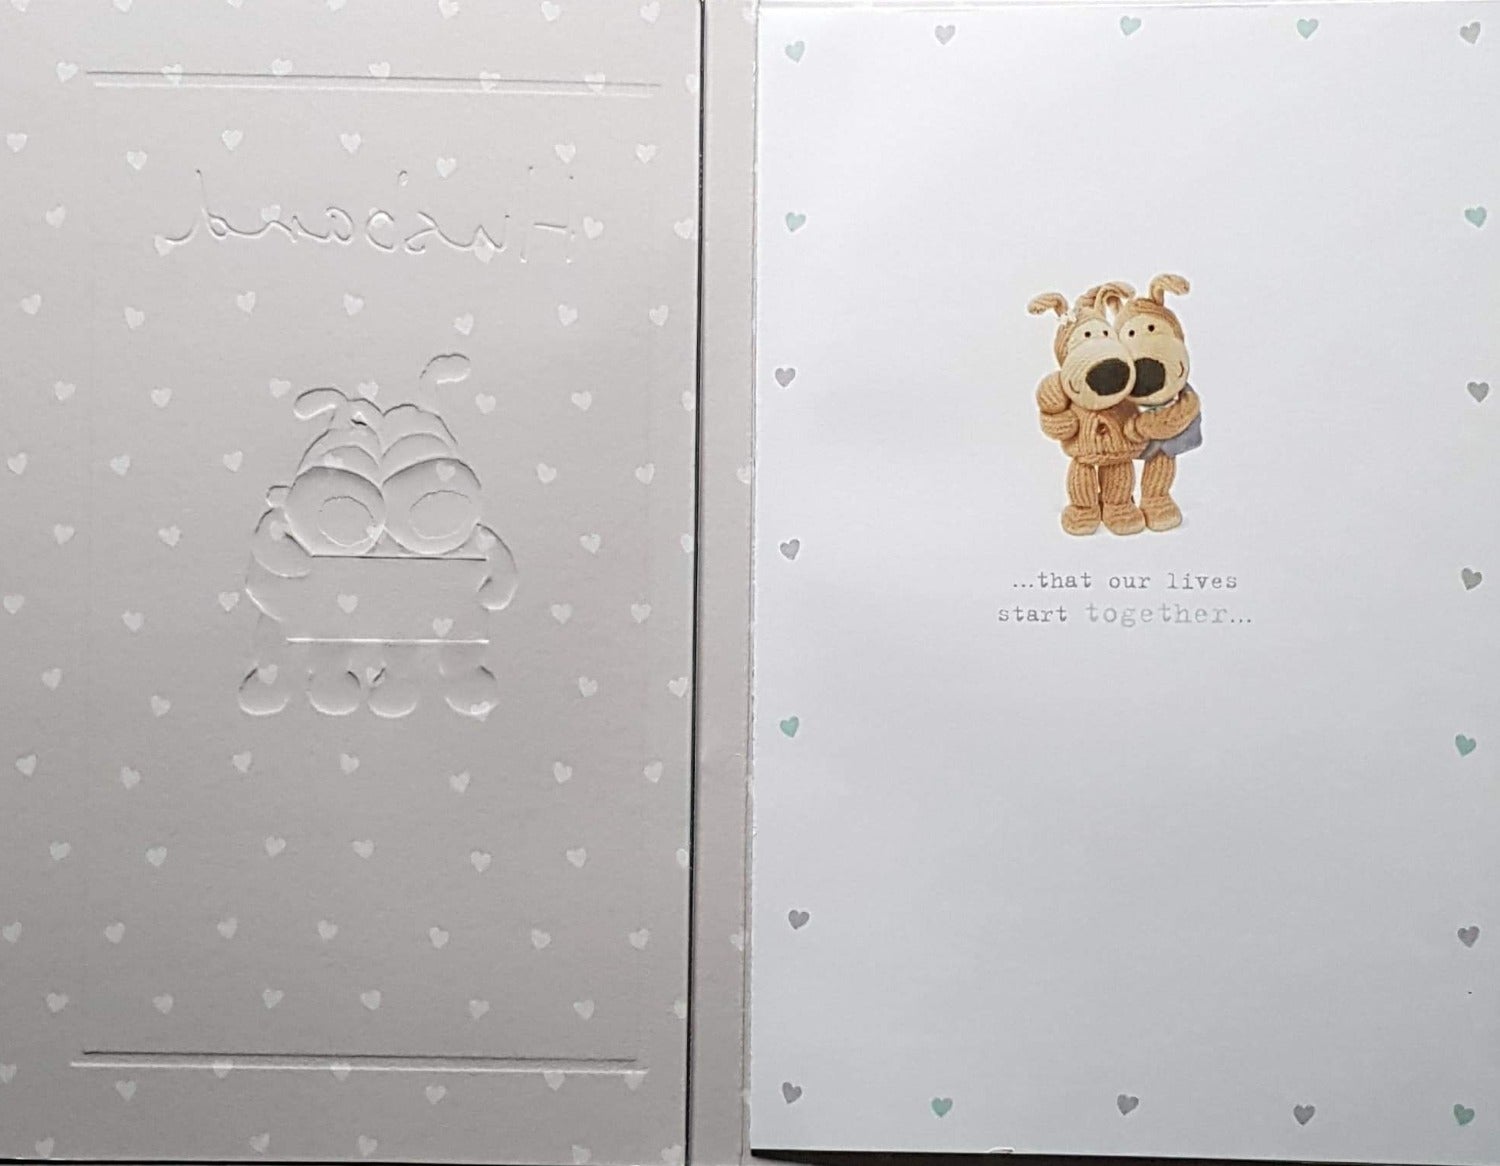 Wedding Card - Husband / 'Today's The Day'